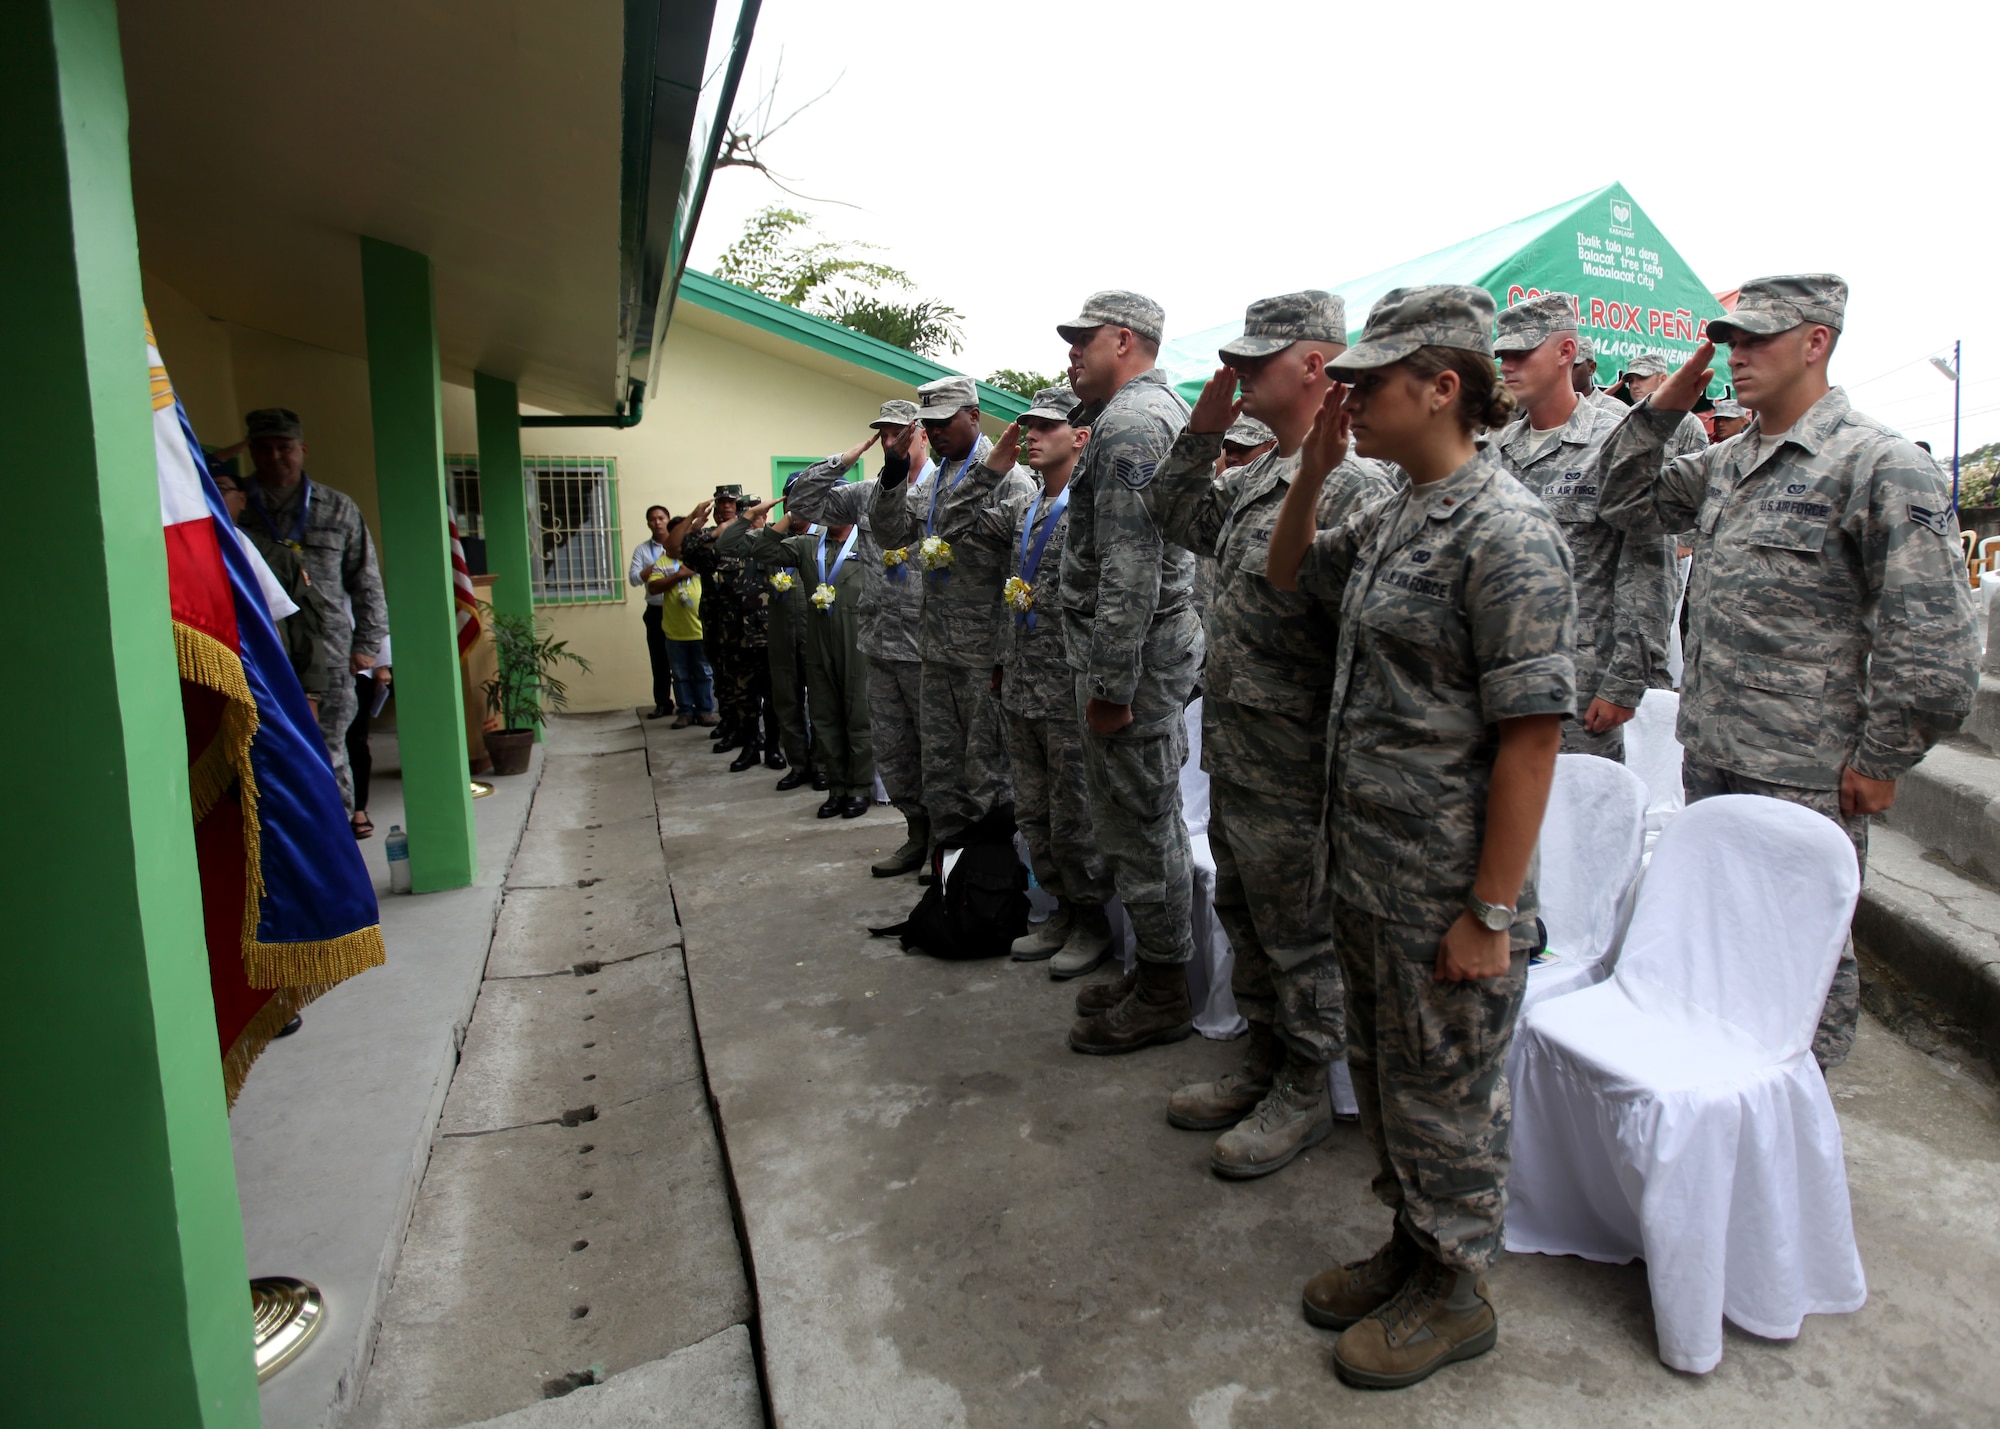 U.S. Airmen and Republic of the Philippines Airmen
salute during the Filipino National Anthem at a
dedication ceremony at Clark Air Force Base, Republic
of the Philippines on September 20, 2012. U.S. Air Force
Civil Engineering Squad 647 out of Joint Base Pearl
Harbor teamed up with the Republic of the Philippines
Air Force to build an addition onto a local schoolhouse
before dedicating it to the community. The U.S. military
and Republic of the Philippines military work together
to strengthen interoperability between the Philippine
and U.S. government. (U.S. Marine Corps photo by LCpl
Katelyn Hunter/Released).